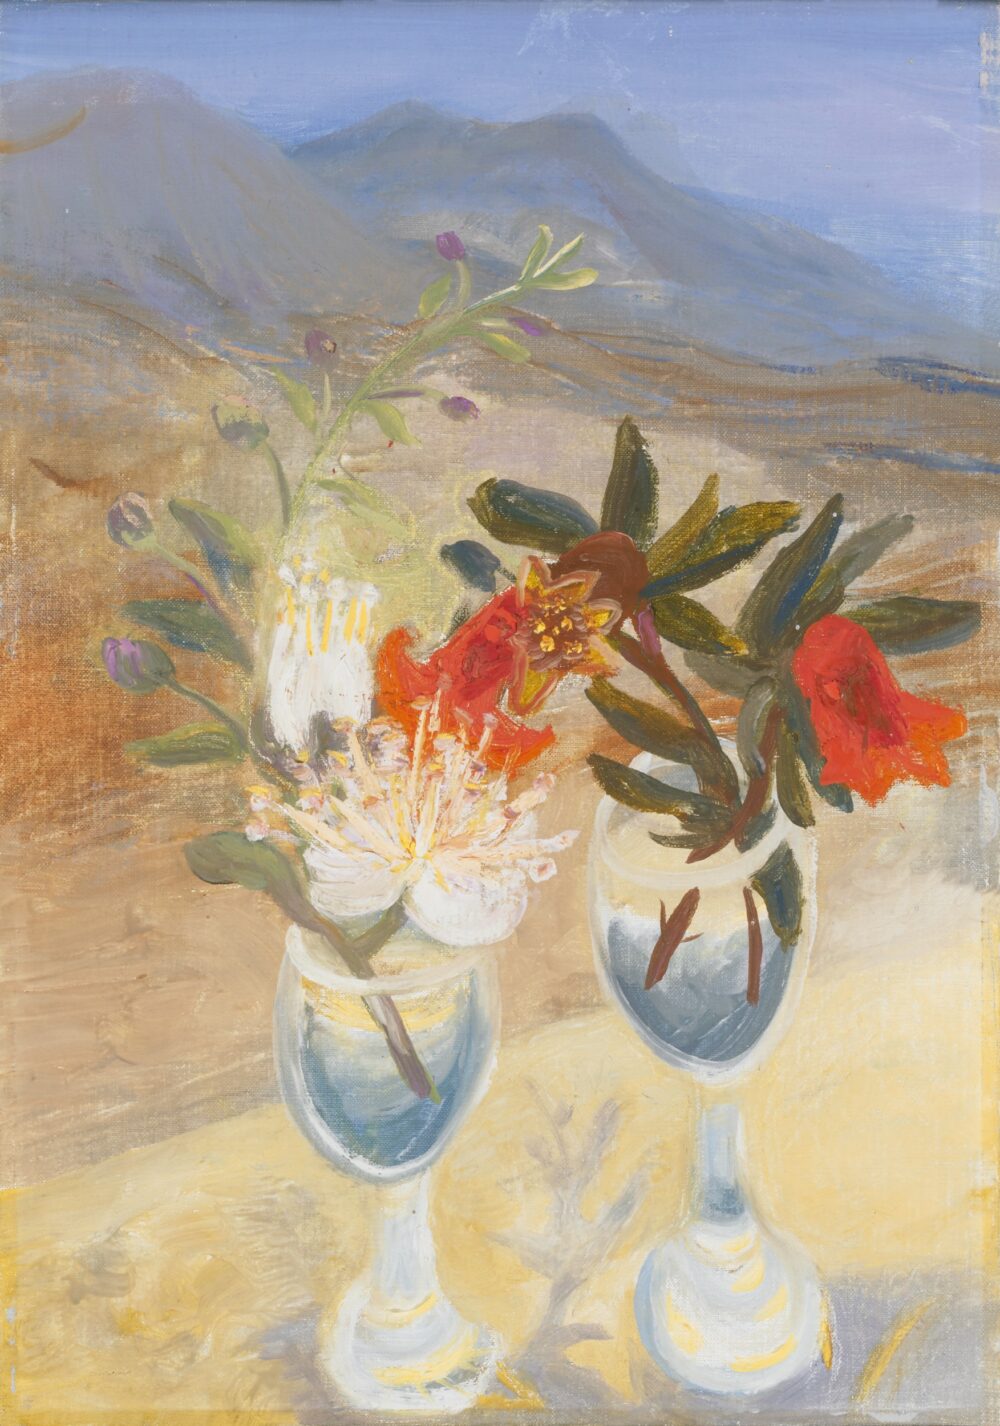 National Museums Liverpool: Capari and Pomegranate, by Winifred Nicholson © Trustees of Winifred Nicholson